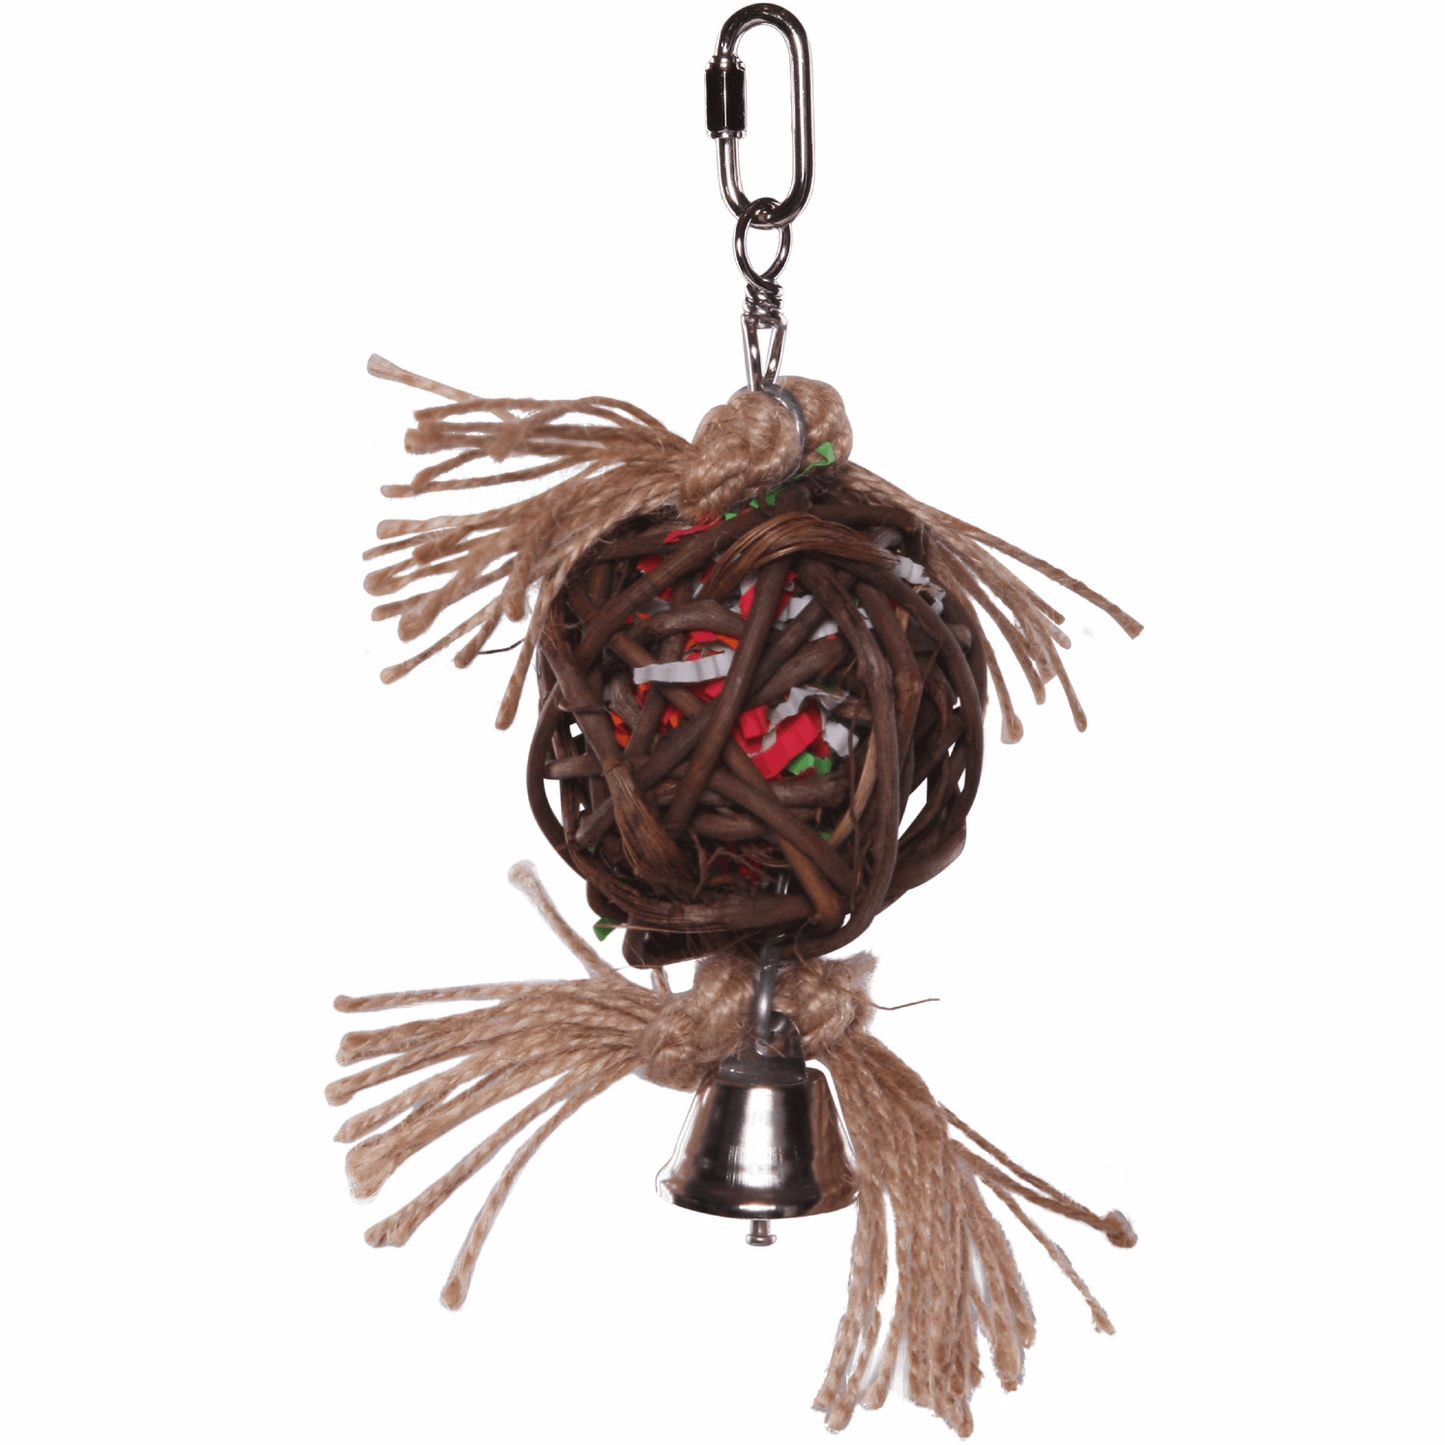 Kazoo Hanging Wicker Ball with Bell from Kazoo Pet Co